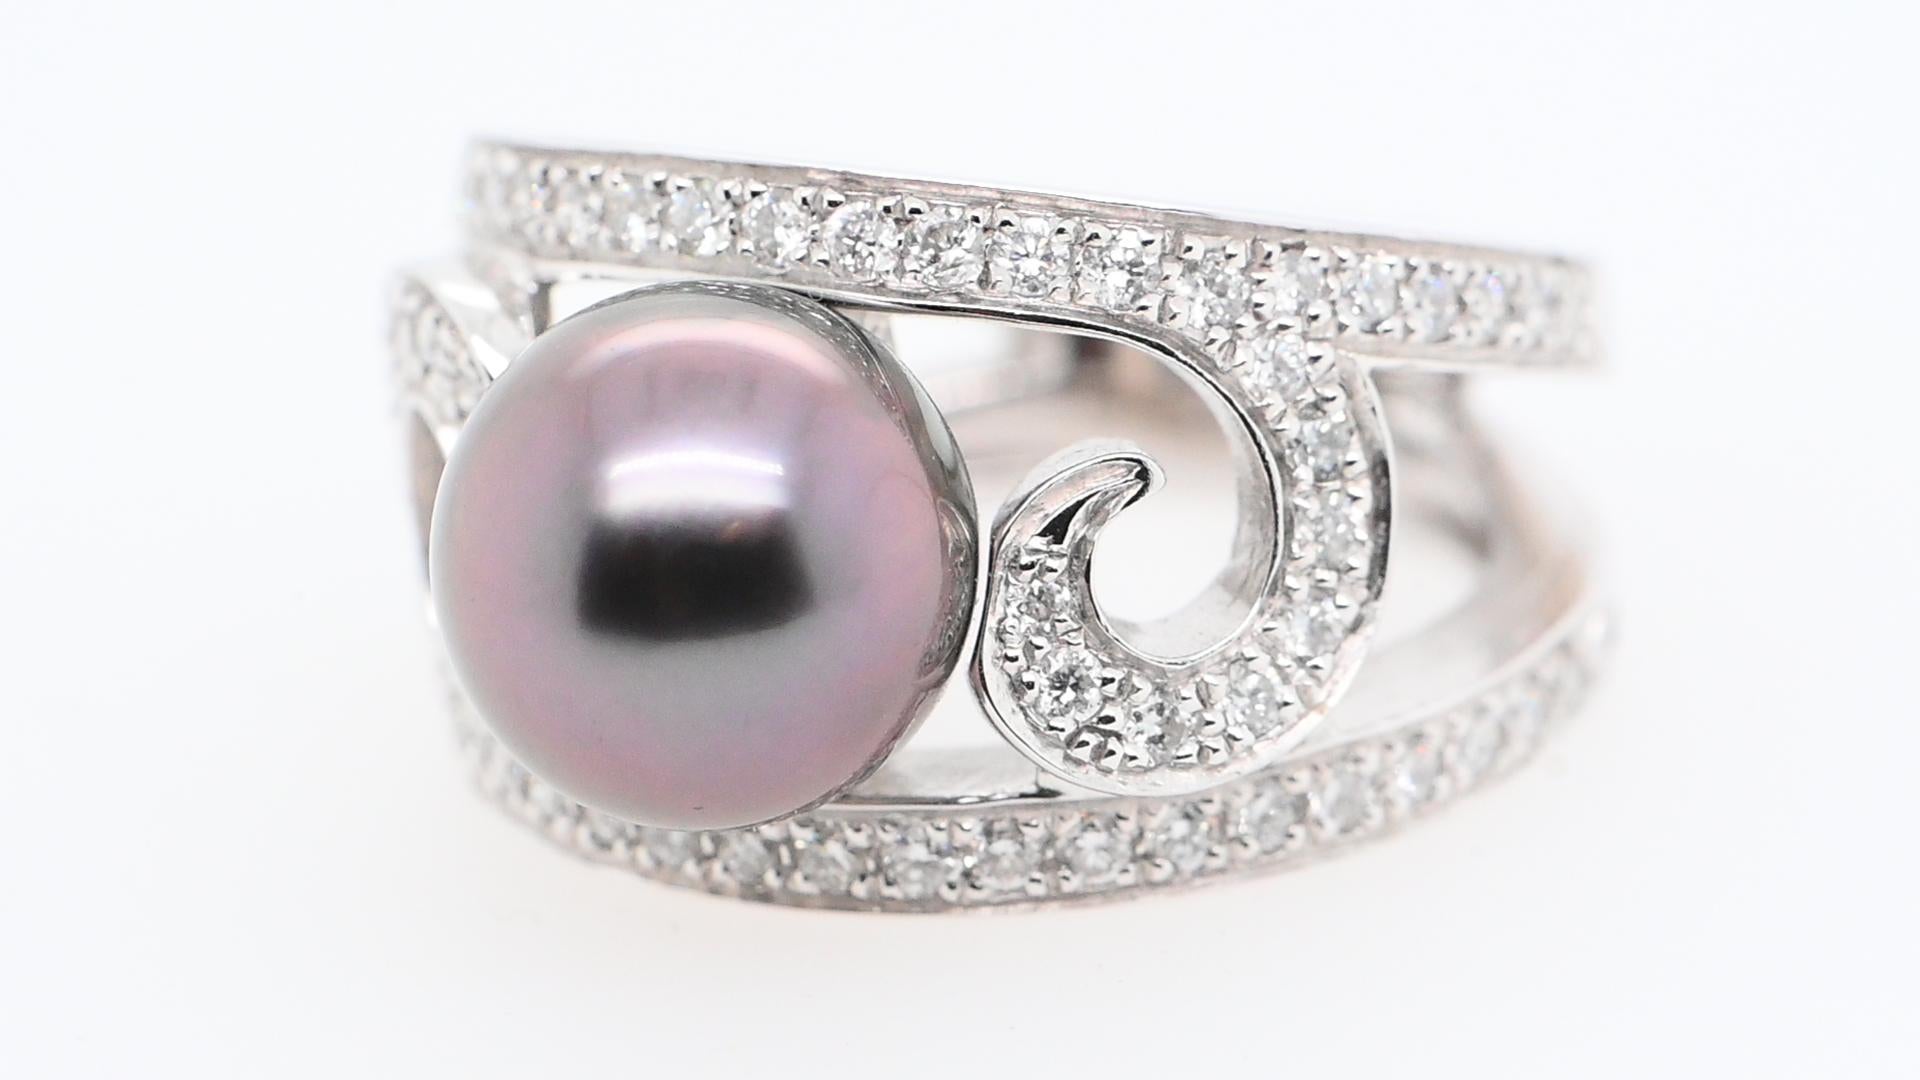 We are delighted to present this sumptuous cocktail ring in 18-carat white gold, featuring an elegant Tahitian pearl and sparkling white diamonds.

This cocktail ring is a true masterpiece of jewelry, combining the timeless elegance of Tahitian